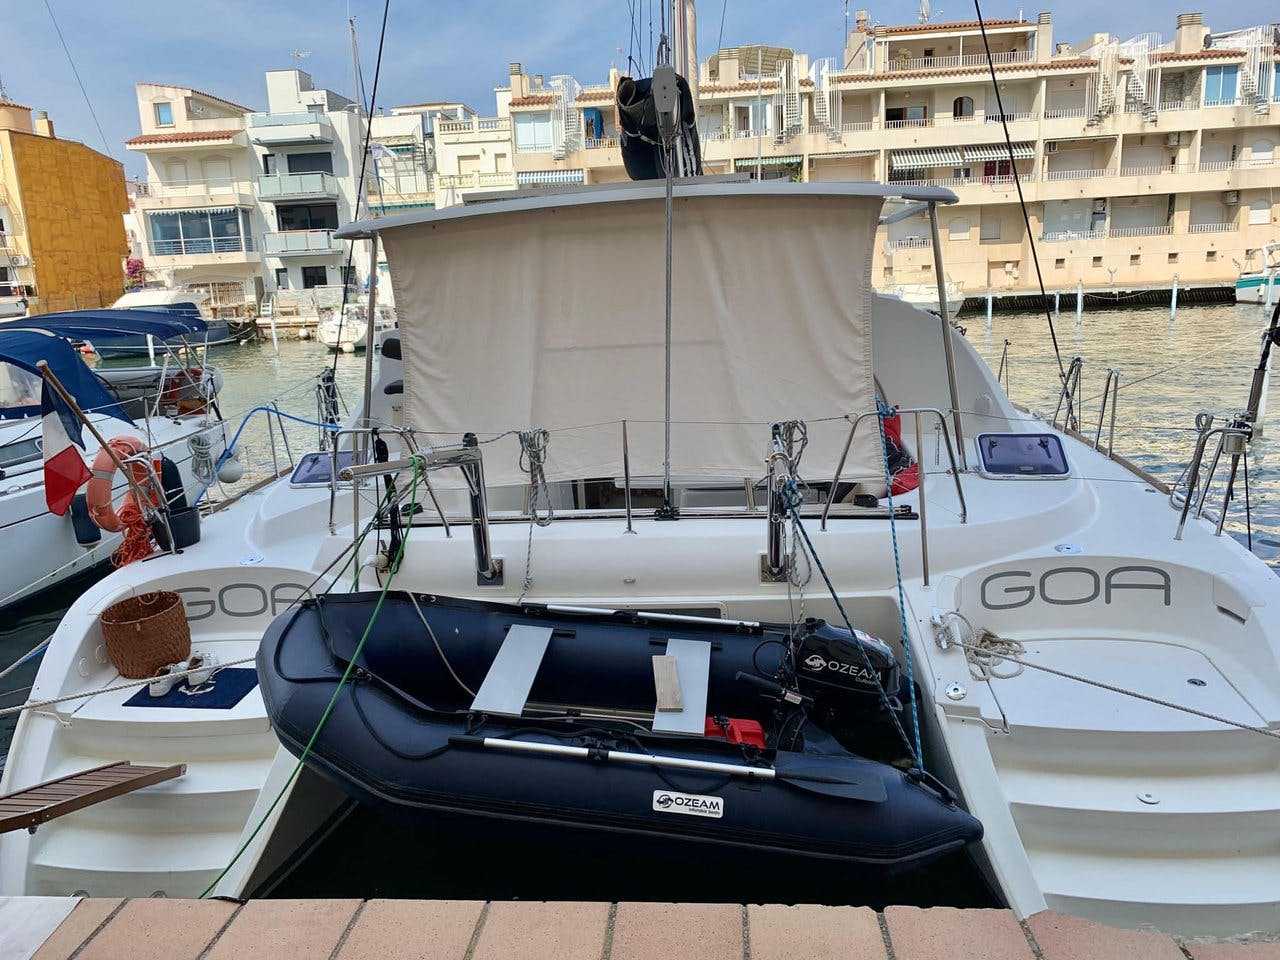 Book Lagoon 380 - 4 cab. Catamaran for bareboat charter in Roses, Empuriabrava marina, Catalonia, Spain with TripYacht!, picture 3